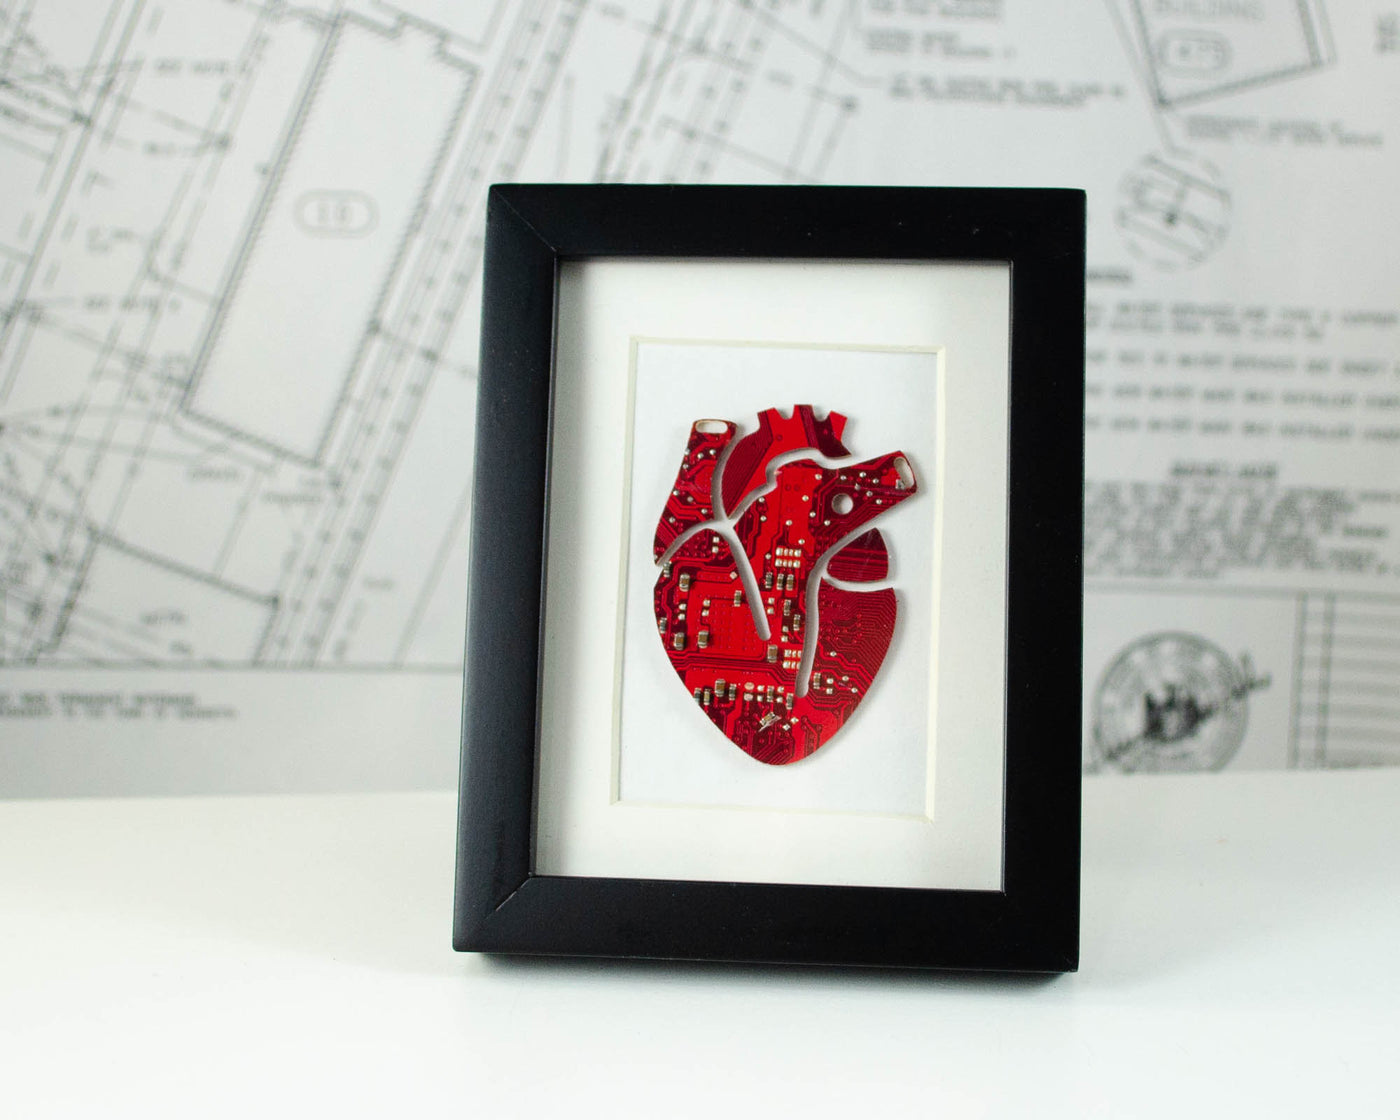 mini framed art of an anatomical heard made from recycled red circuit board